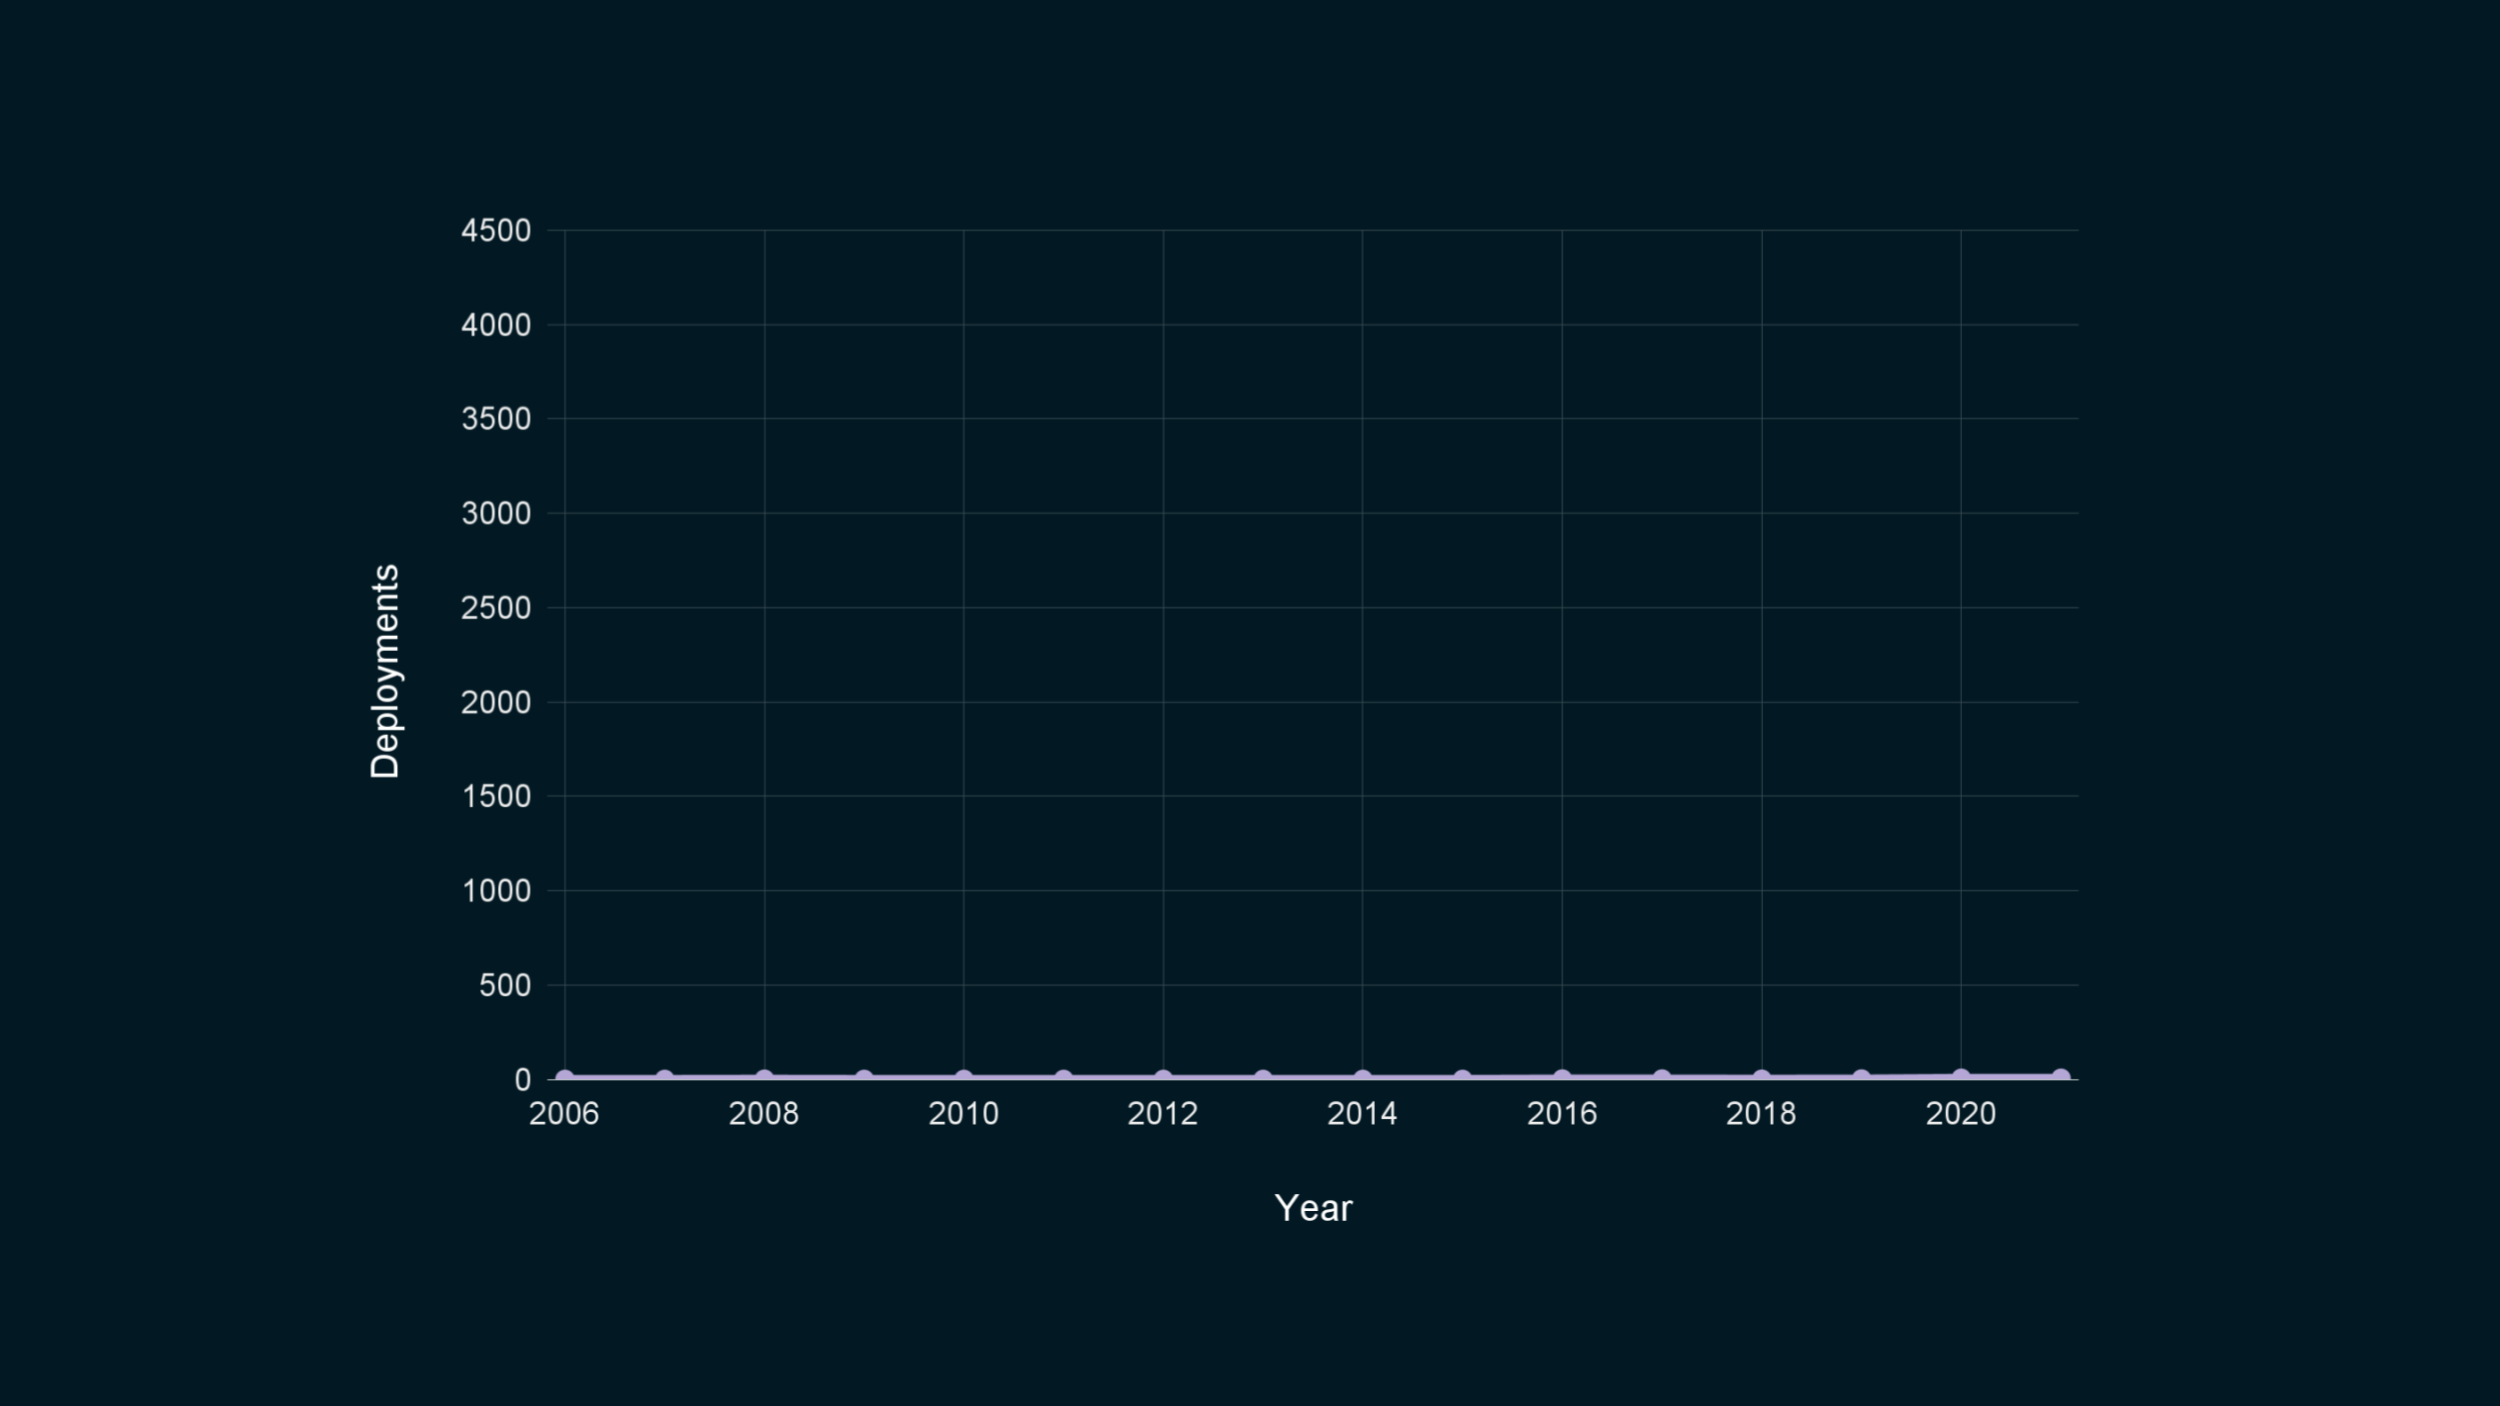 The same graph, except the vertical axis is labeled "deployments", and the line is completely flat, at 0.